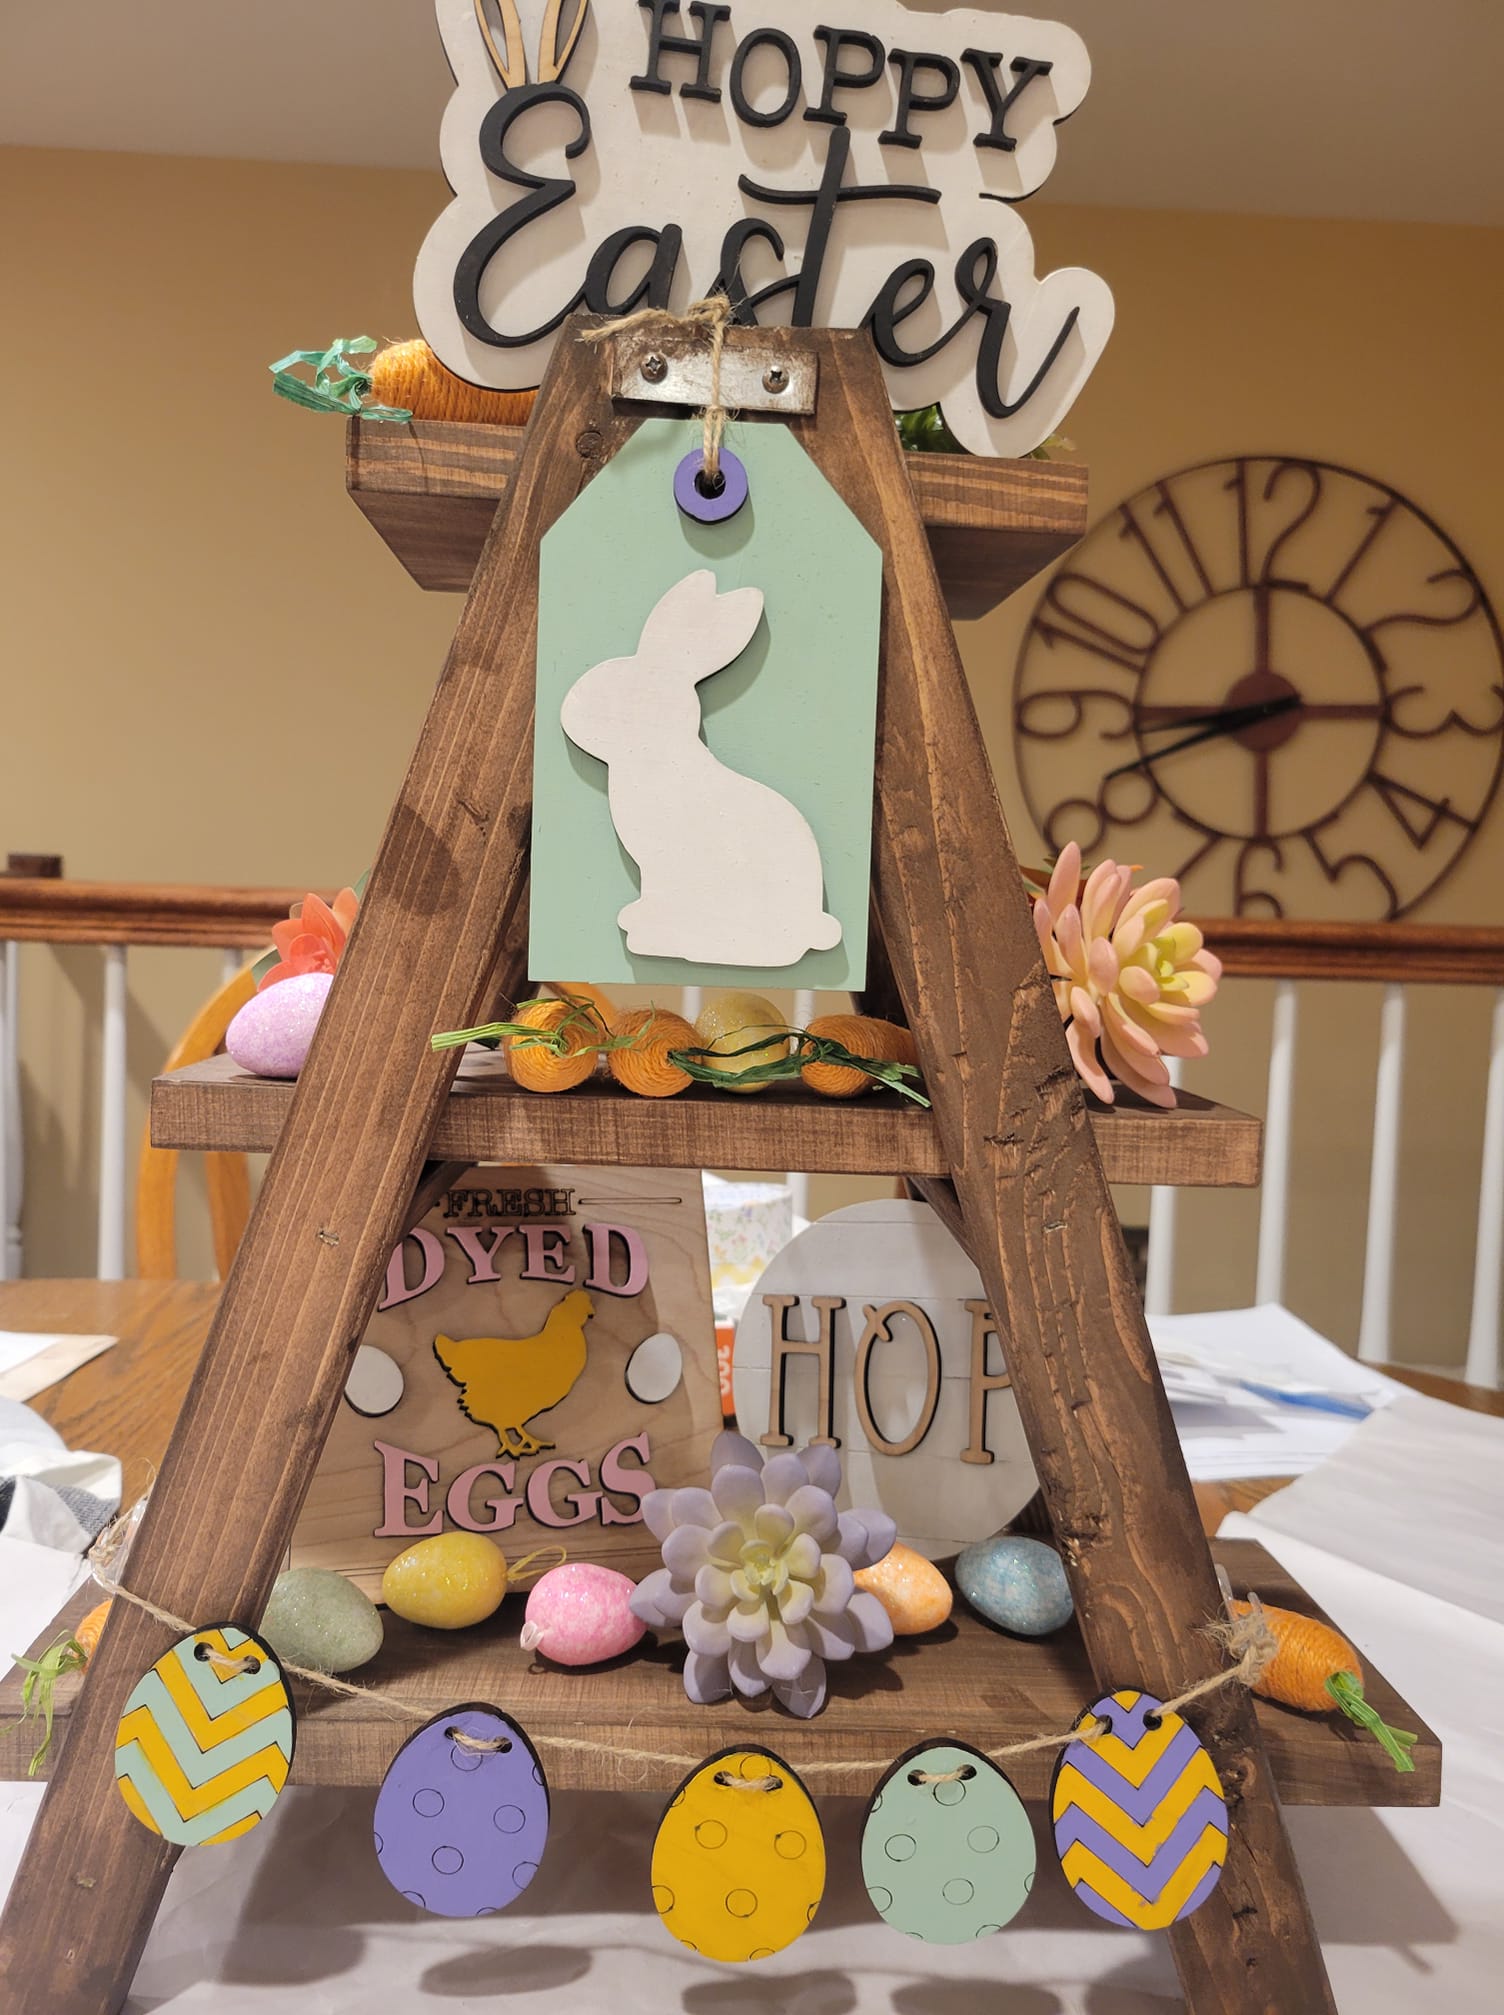  Treory Easter Decorations for The Home, 3 pcs Easter Bunny  Wooden Table Centerpiece Signs Easter Decor Rustic Tiered Tray Decor  Farmhouse Decor for Easter Gifts, Black, White, Natural Wood Color 